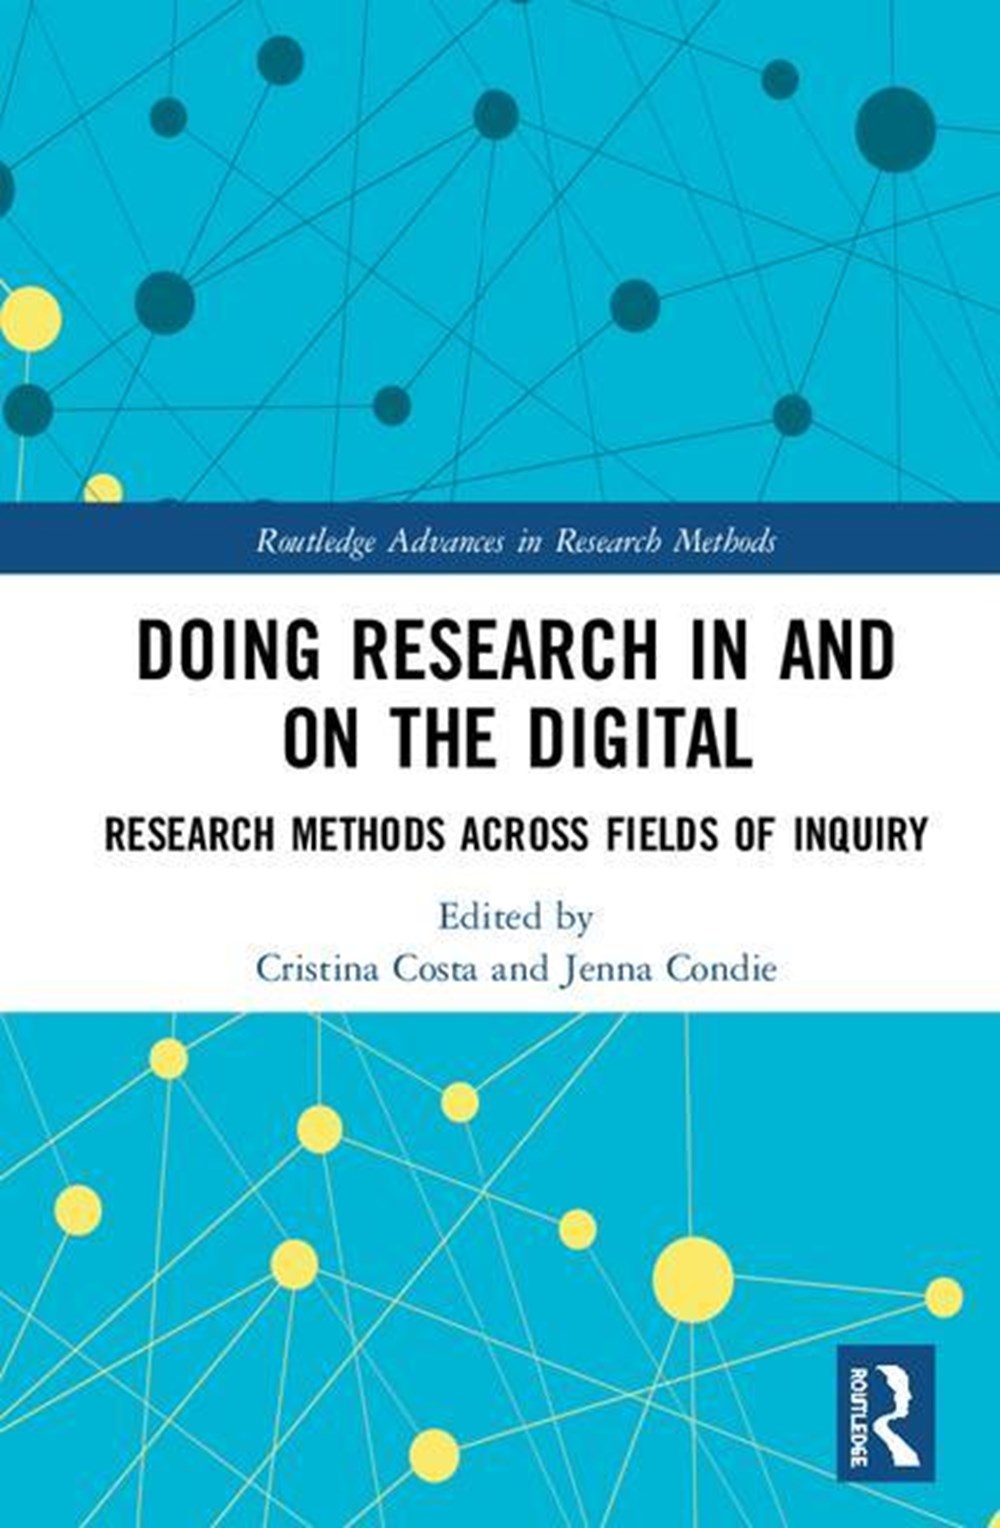 Doing Research in and on the Digital: Research Methods Across Fields of Inquiry